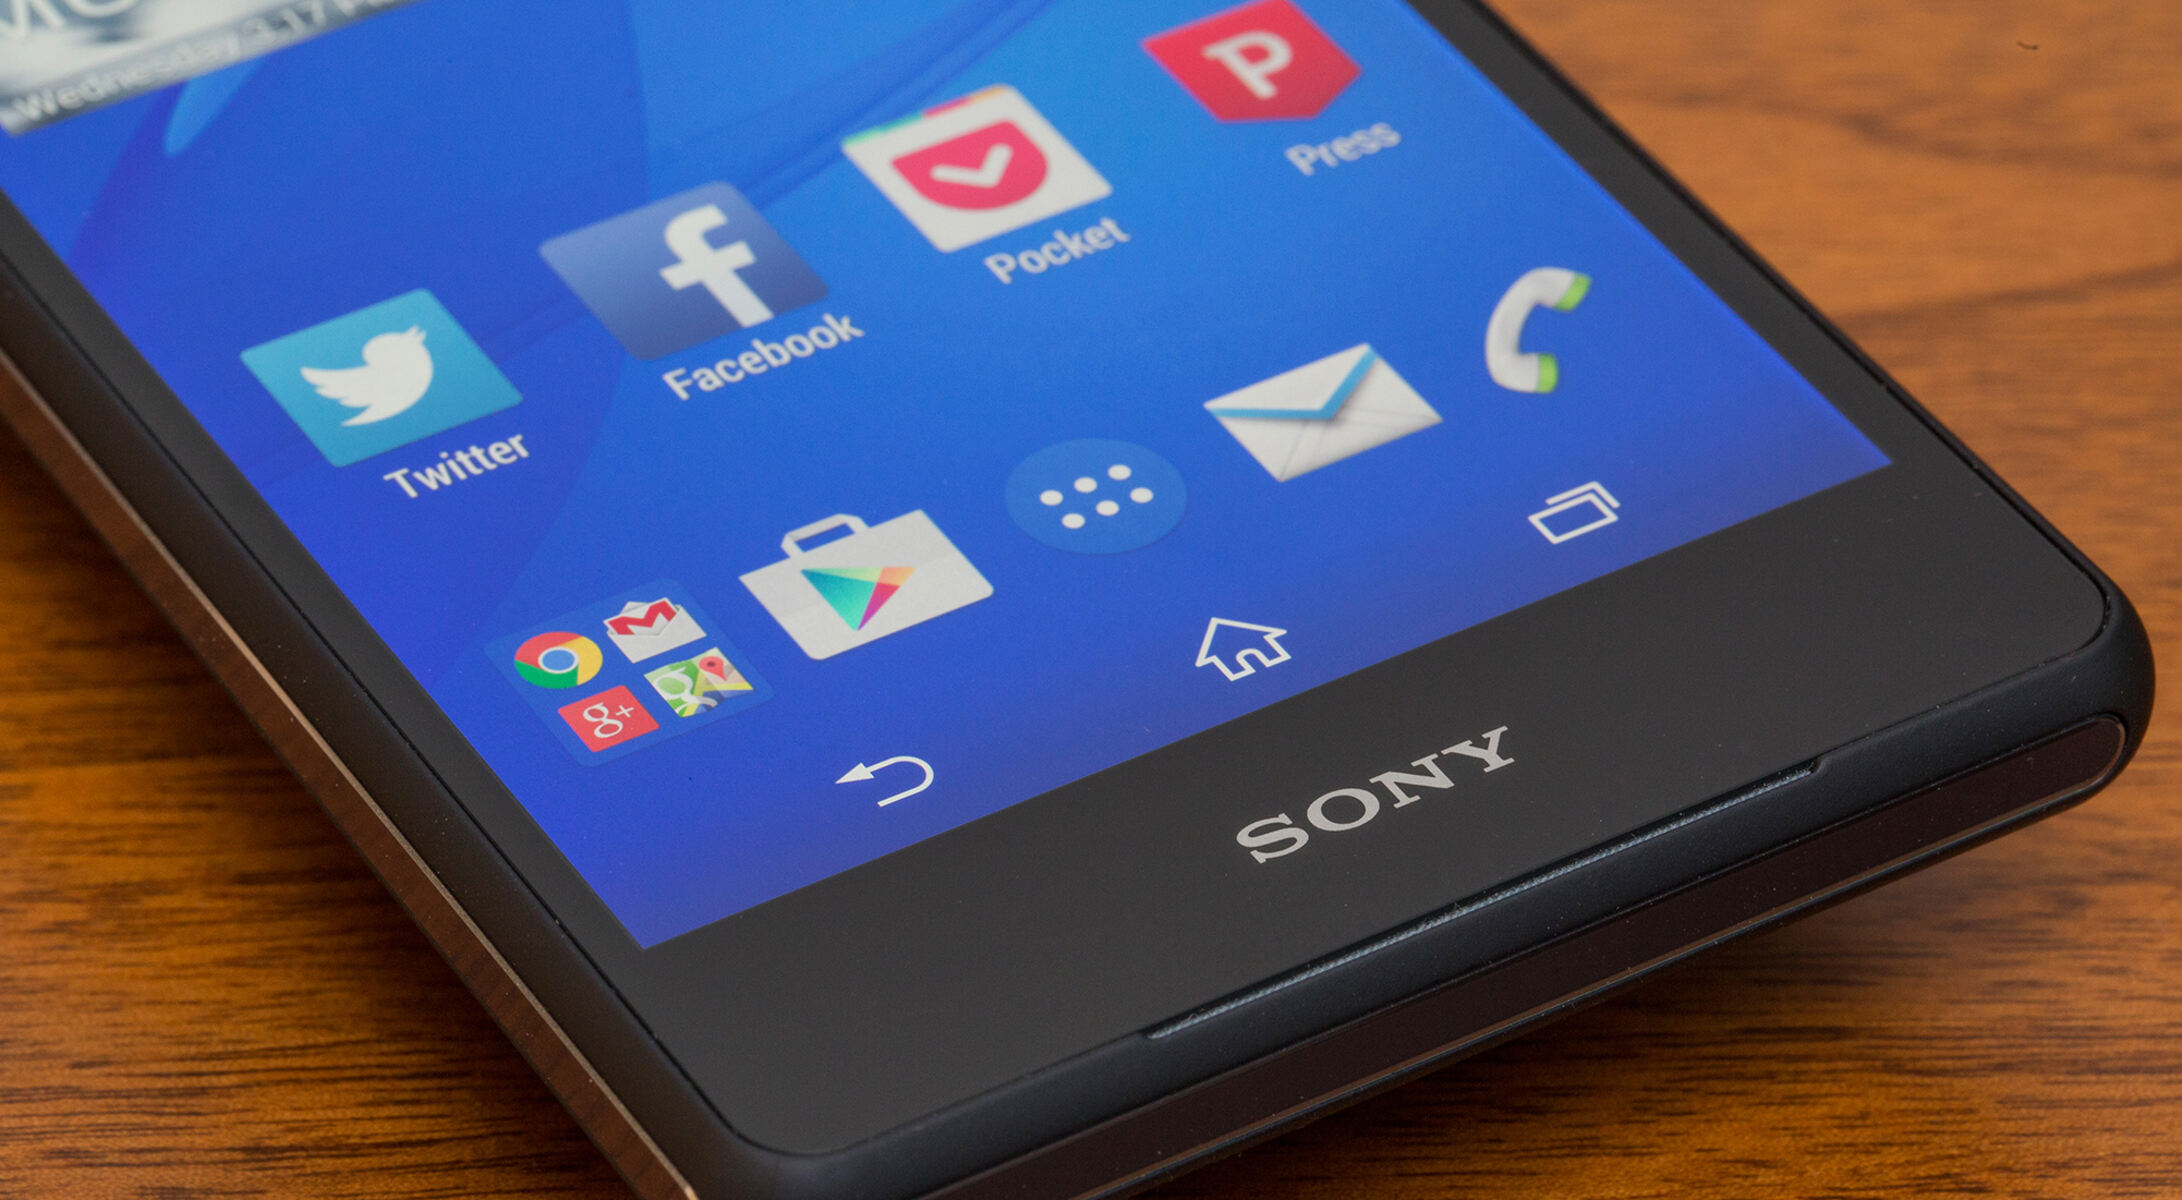 Xperia Z3 And Android: Exploring The Latest Operating System